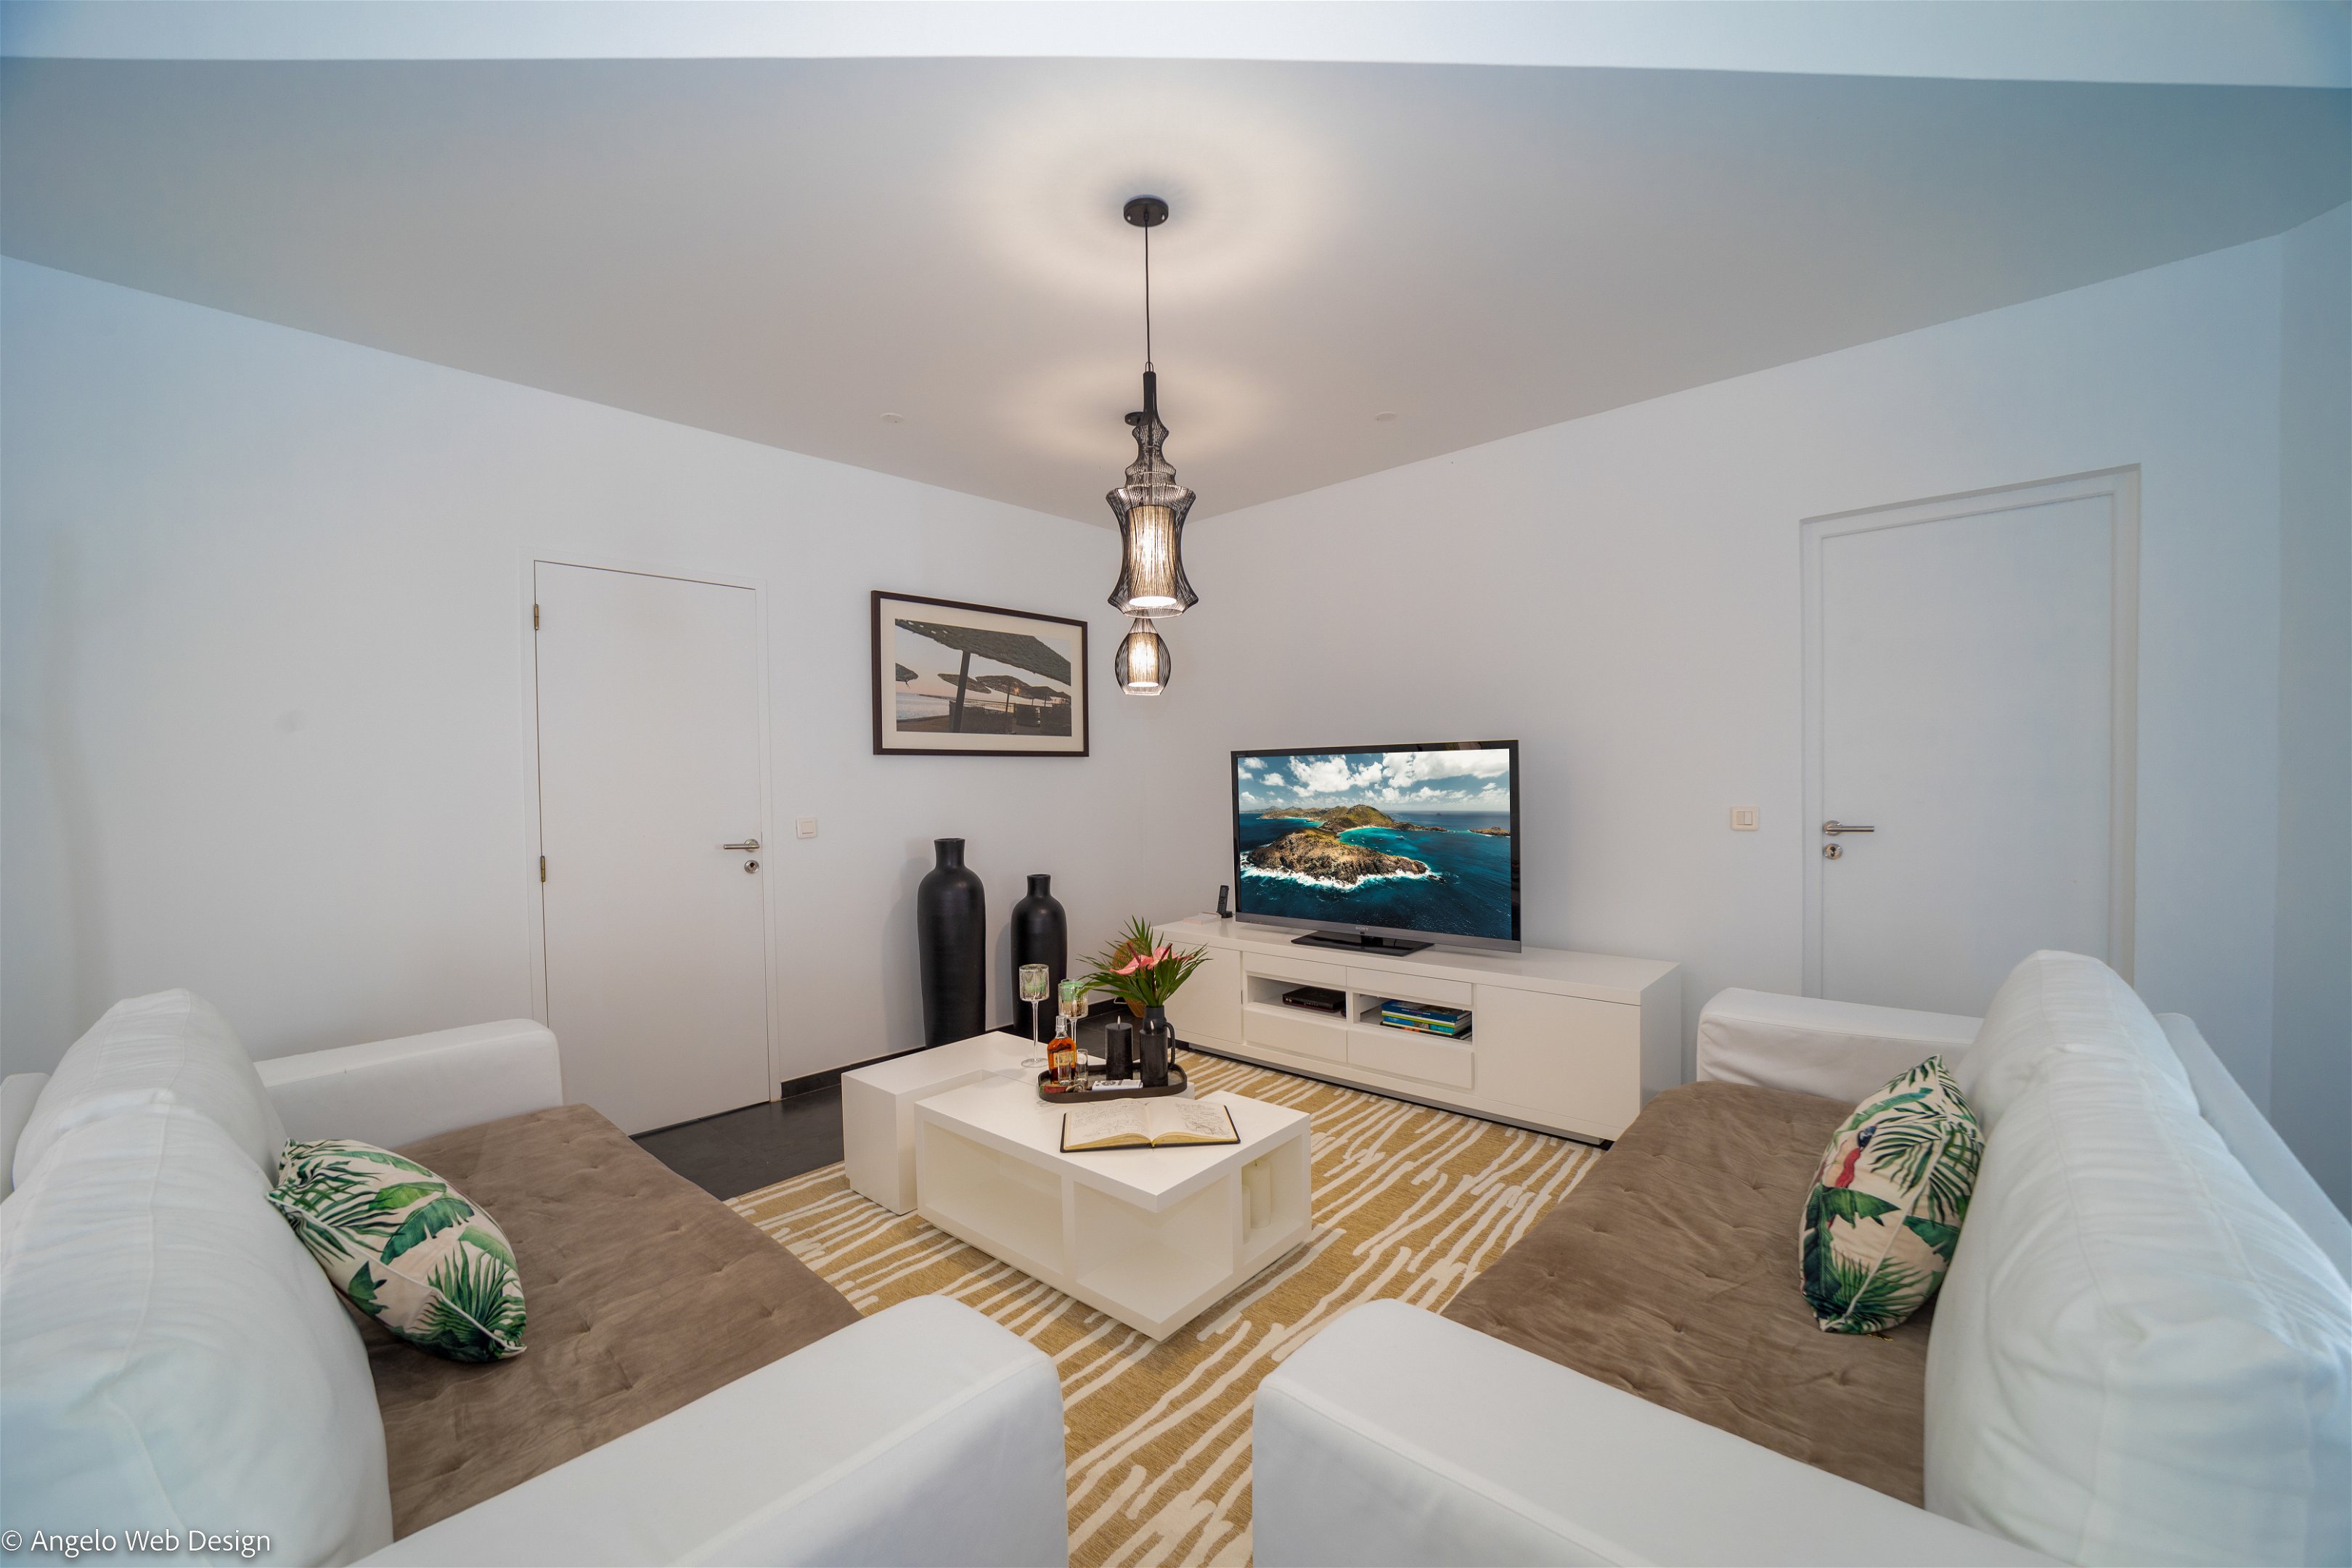 HD-TV, Apple TV, Canal Satellite, Sonos sound system, ceiling fan. An adjoining living area on the covered terrace. 